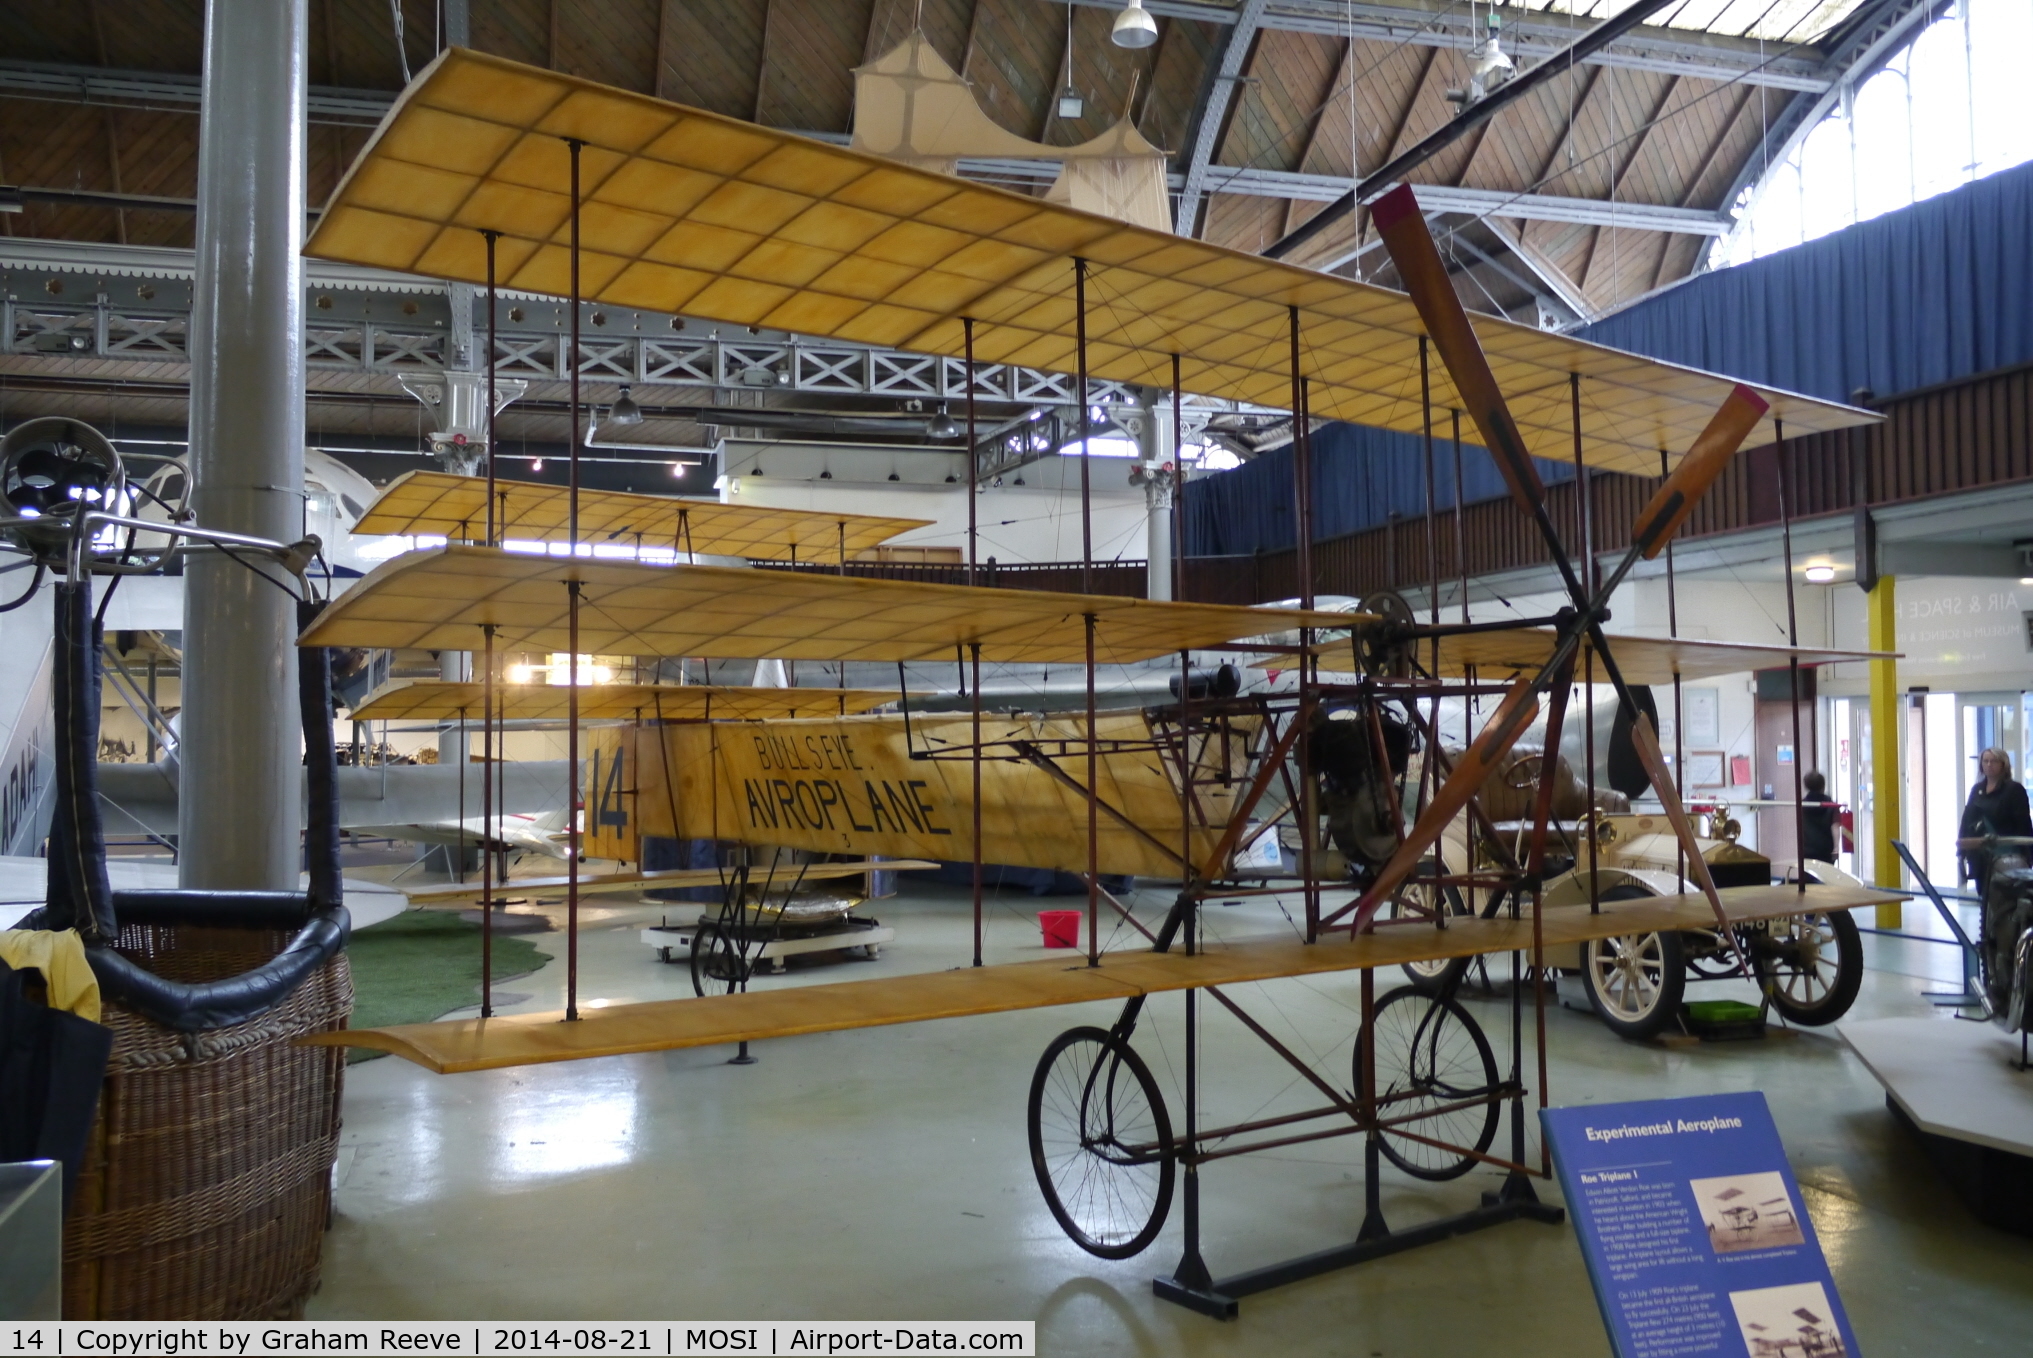 14, Avro Triplane Replica C/N Not found 14, On display at the Museum of Science and Industry, Manchester.